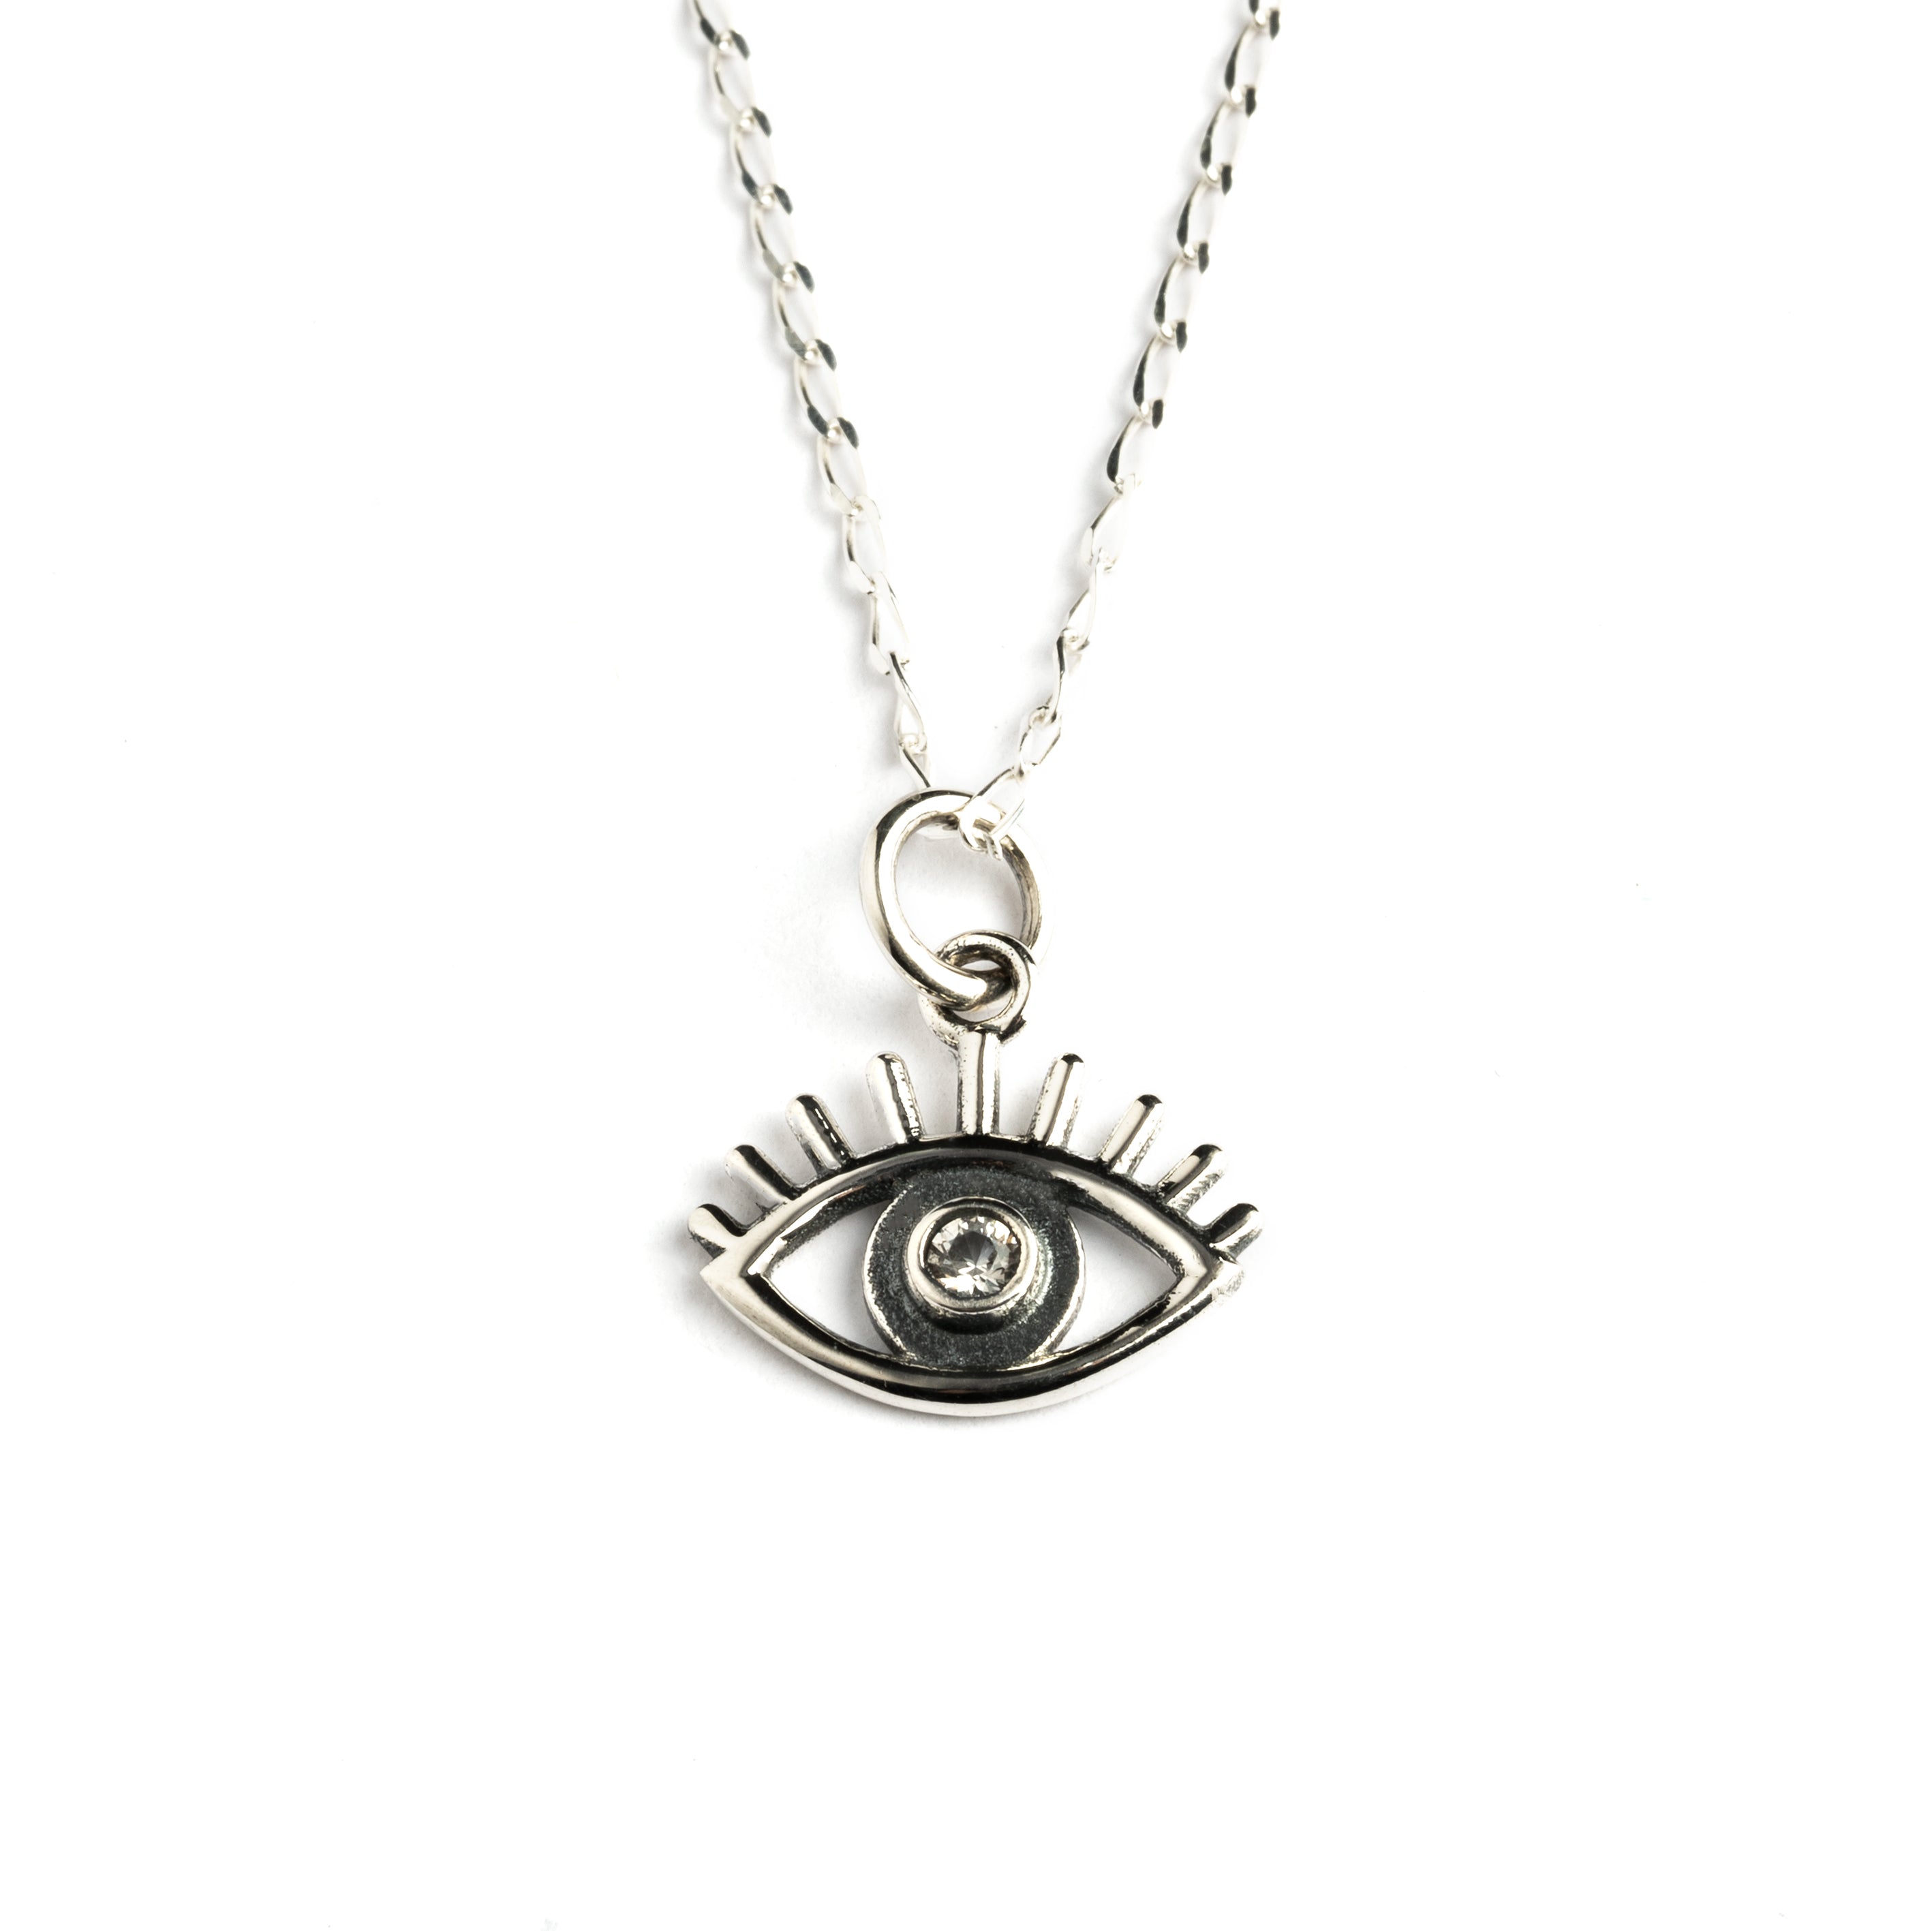 Zircon Evil Eye Charm necklace frontal view